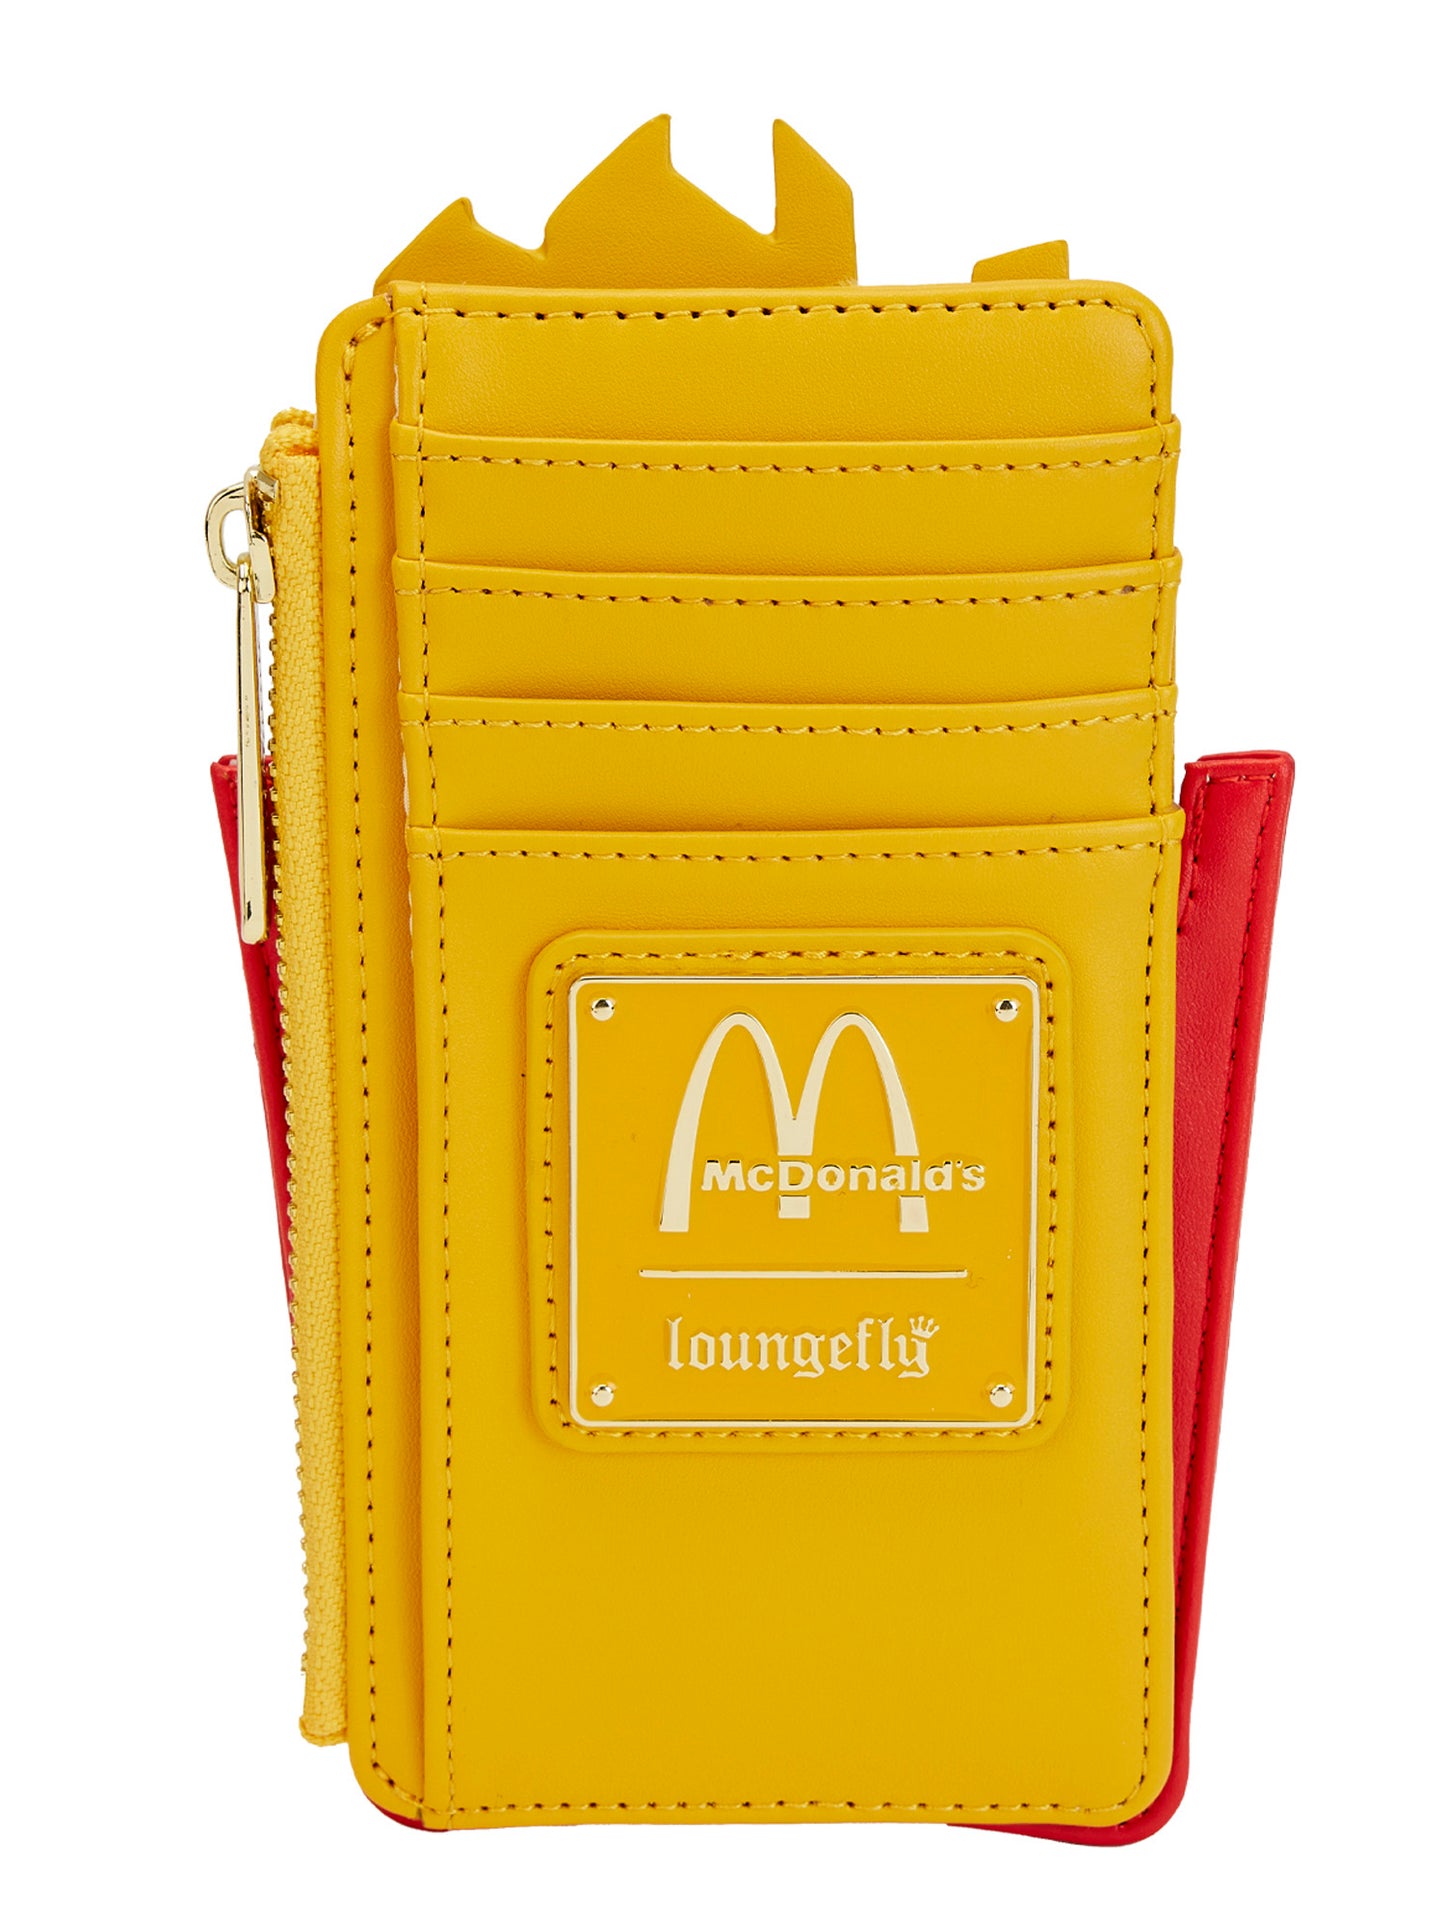 Loungefly x McDonald's French Fries Shaped Cardholder Style